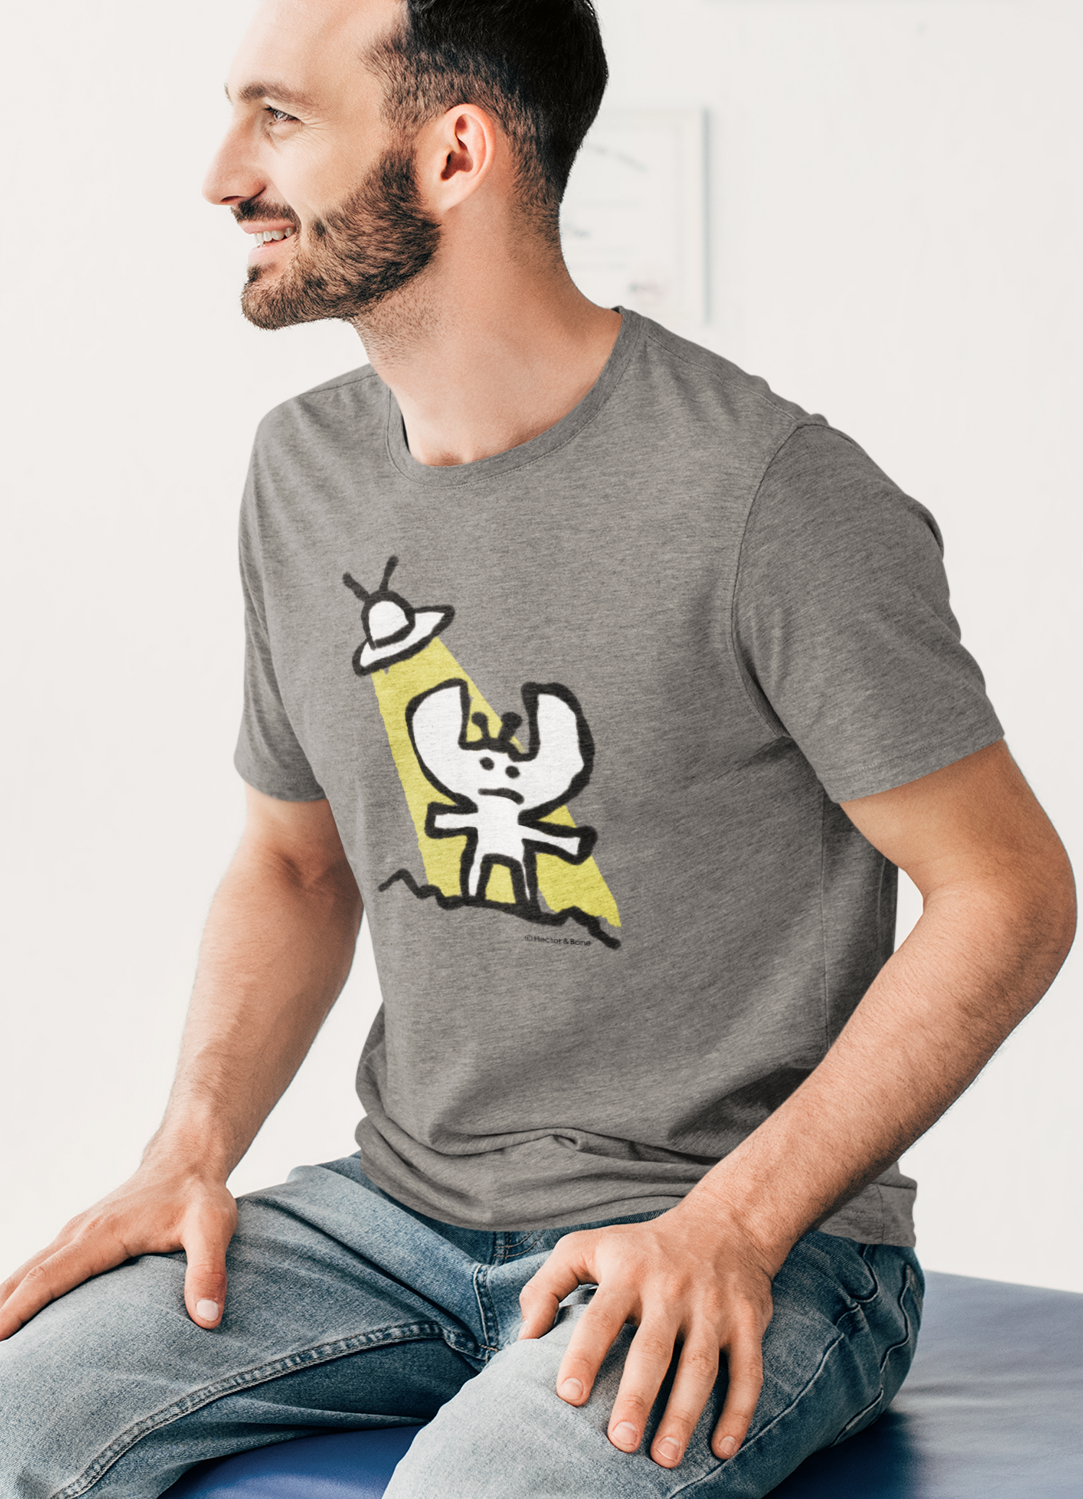 Alien T-shirt - Man wearing a cute Alien and his spaceship tee illustrated on a mid heather grey vegan t-shirt by Hector and Bone